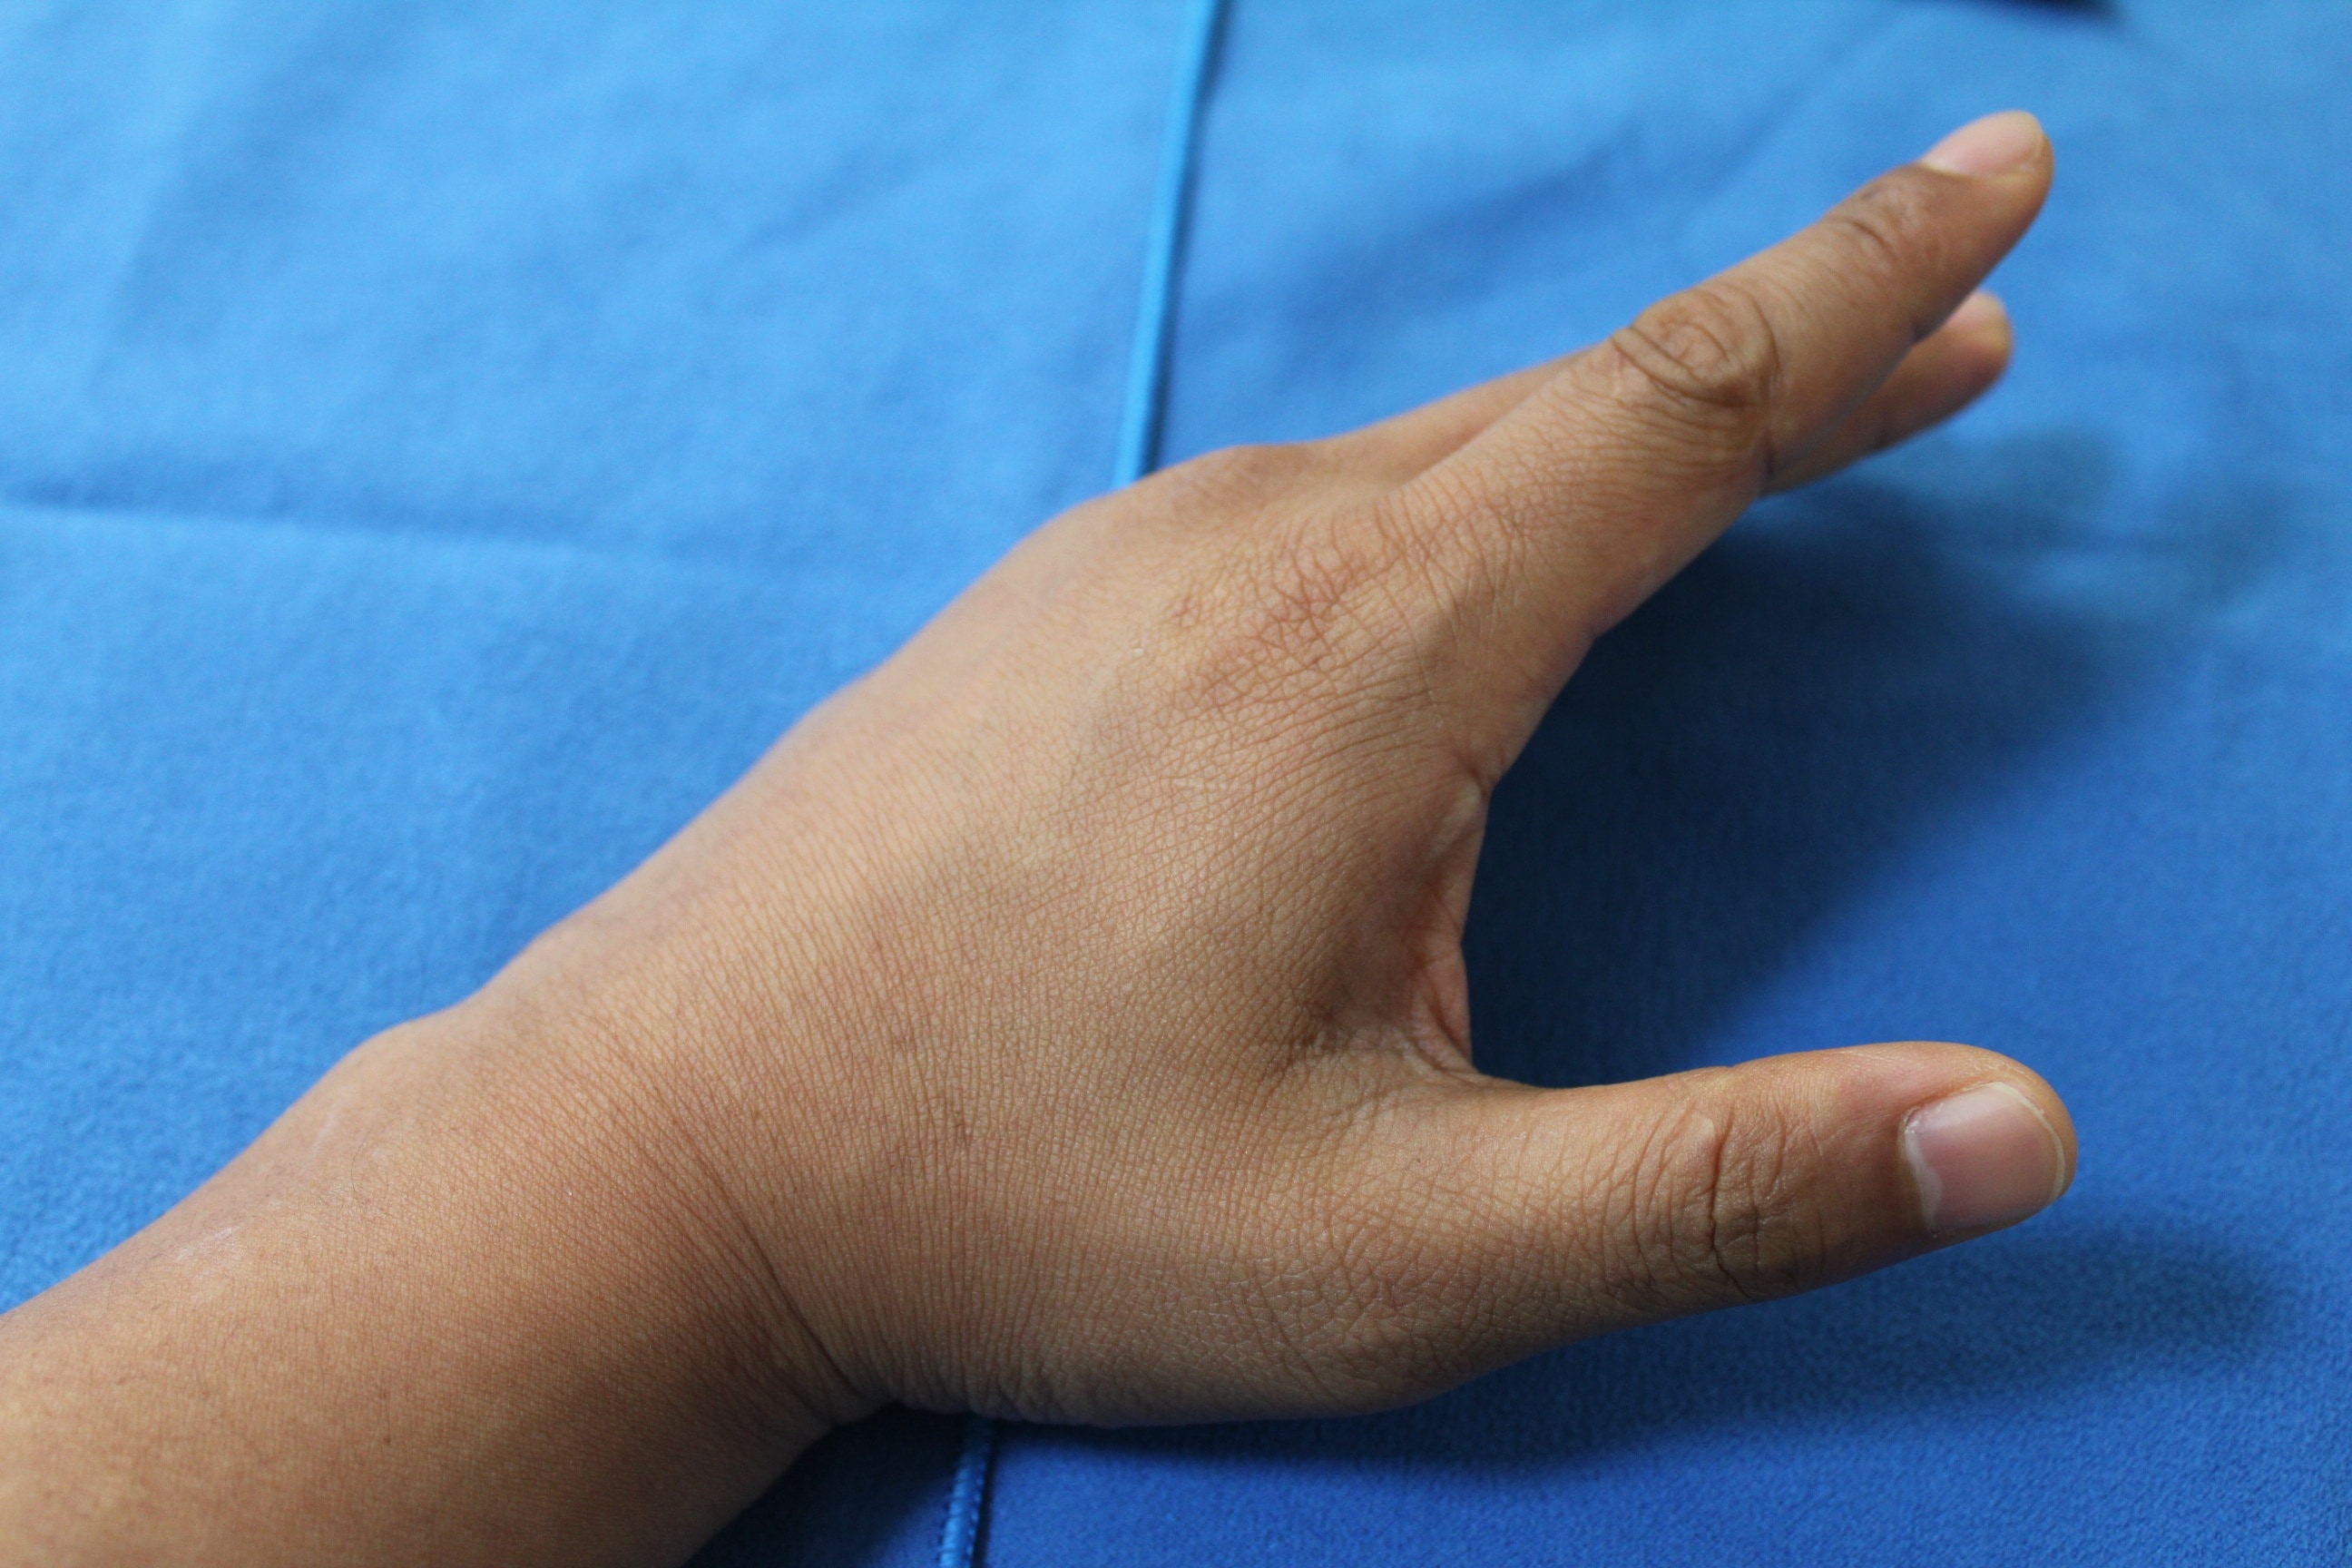 close-up photo of a person's hand on blue textile